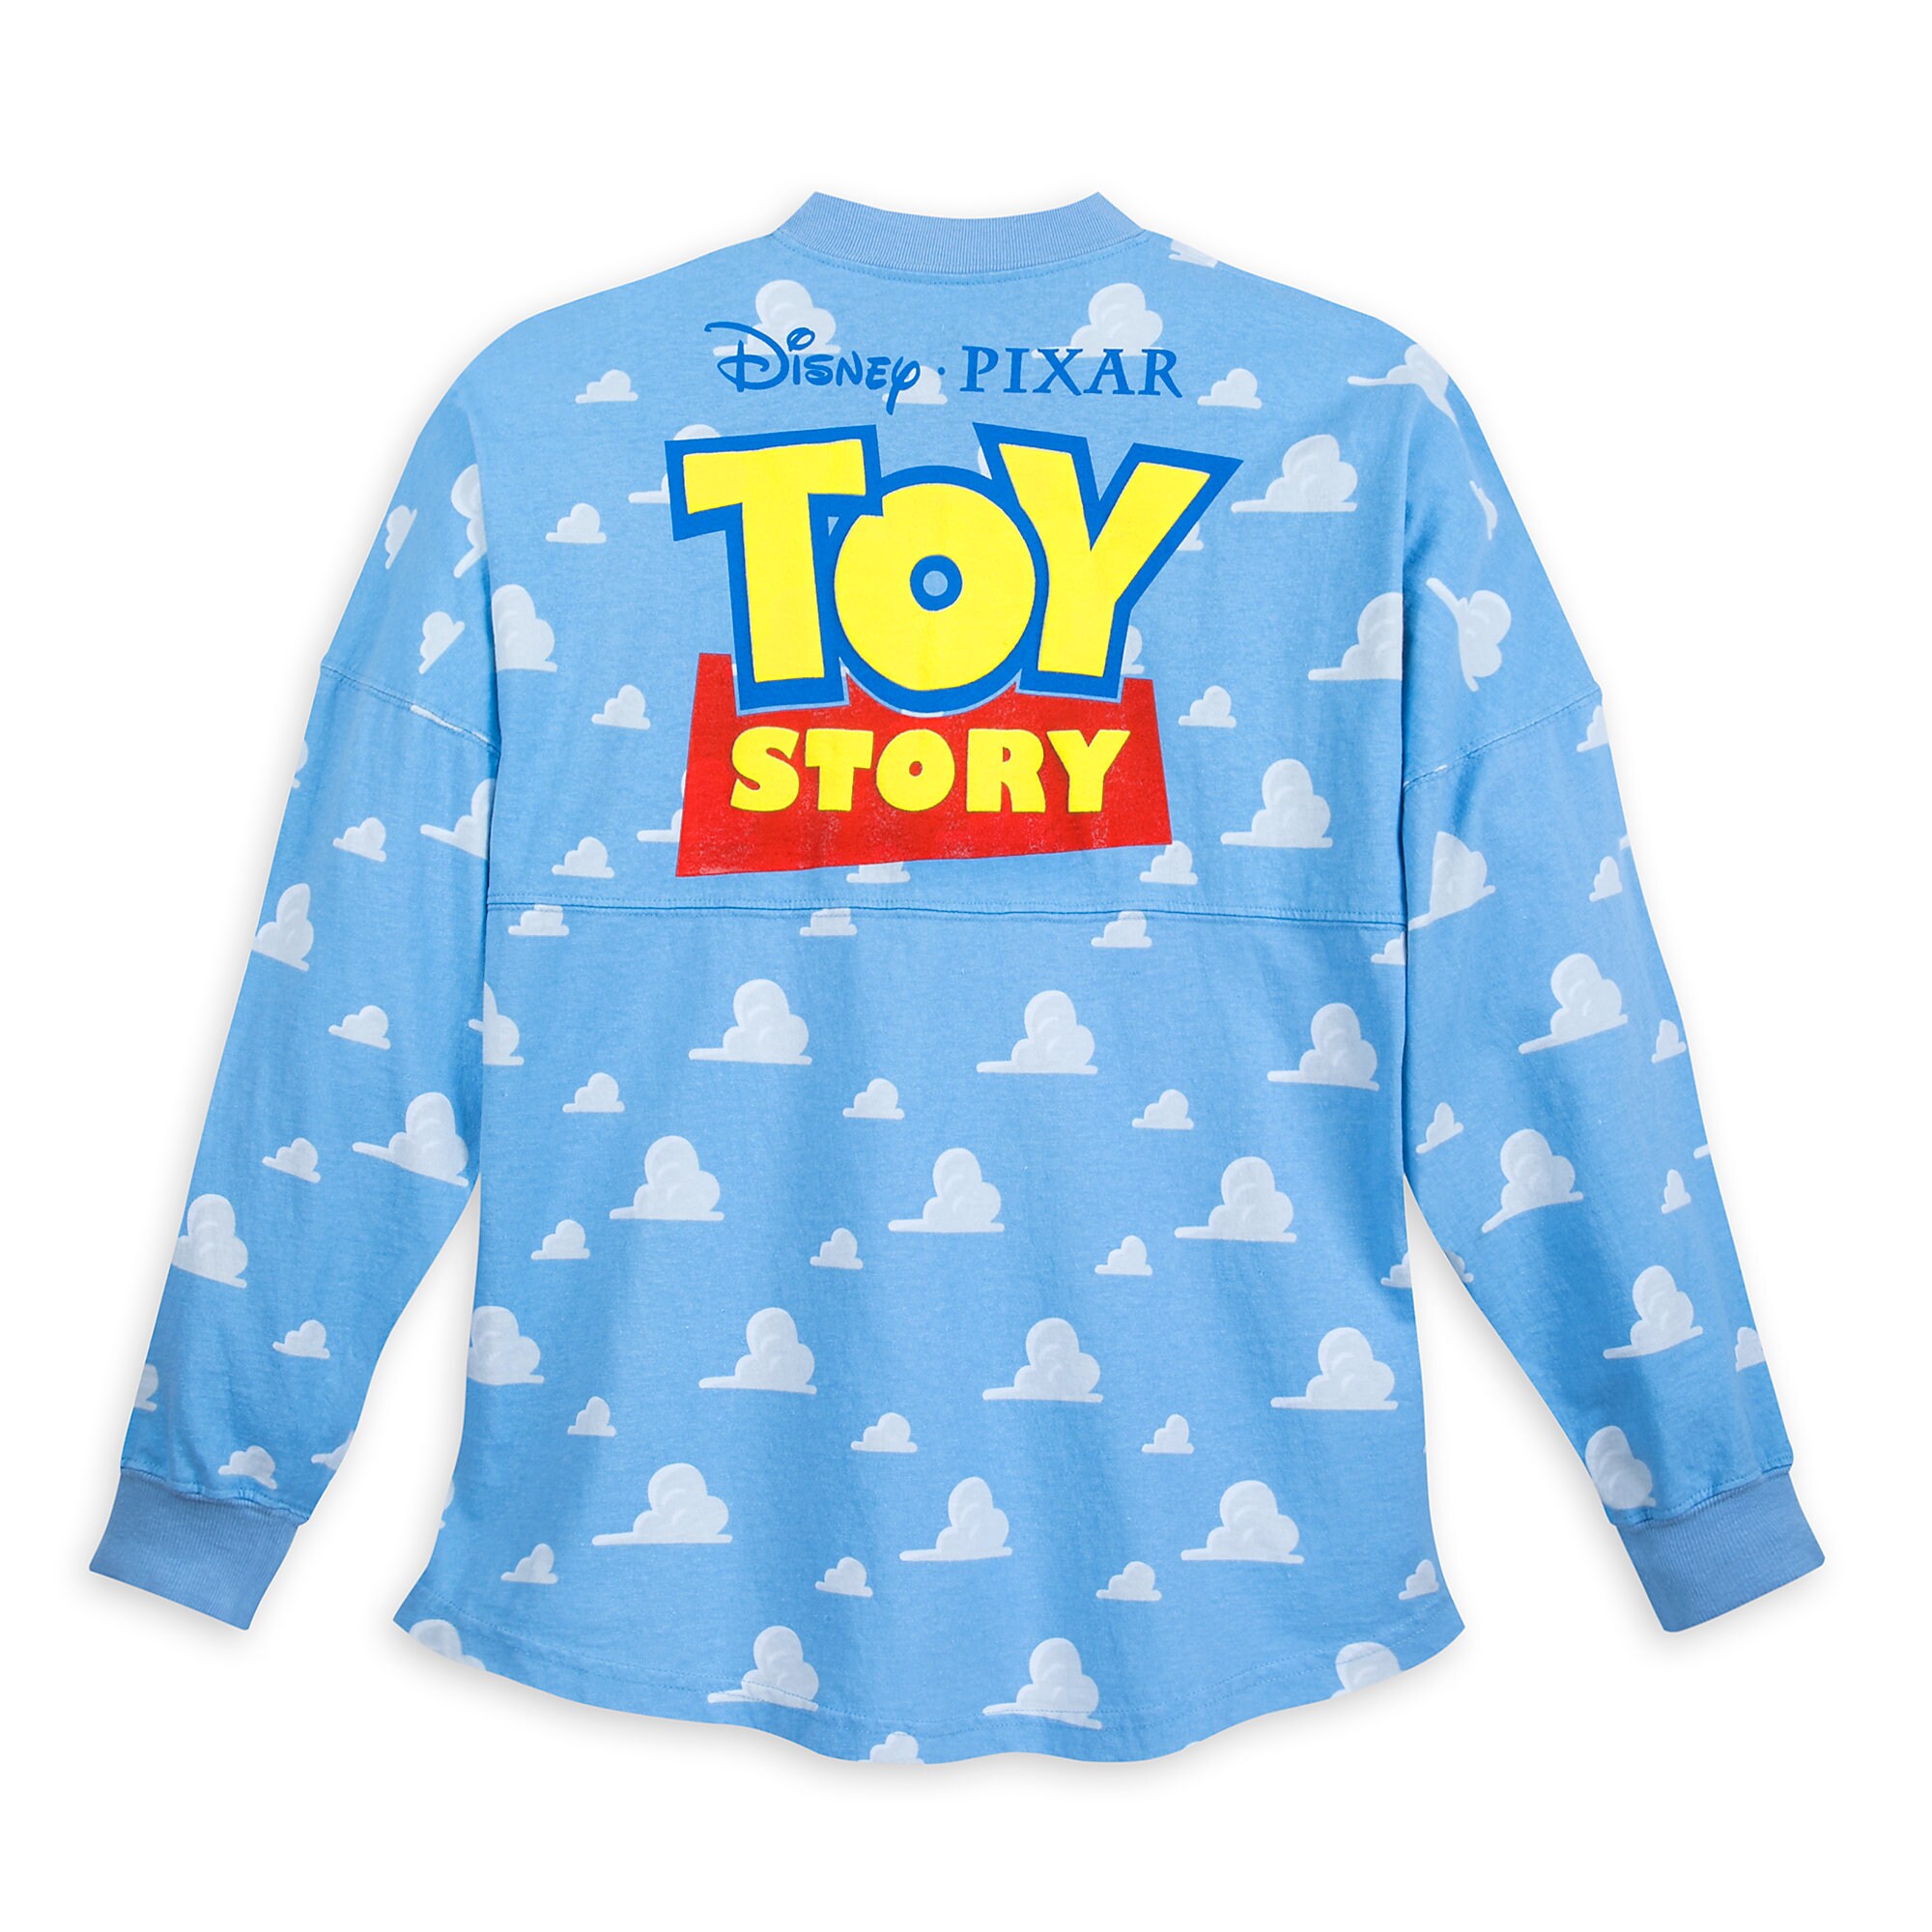 Toy Story Spirit Jersey for Adults